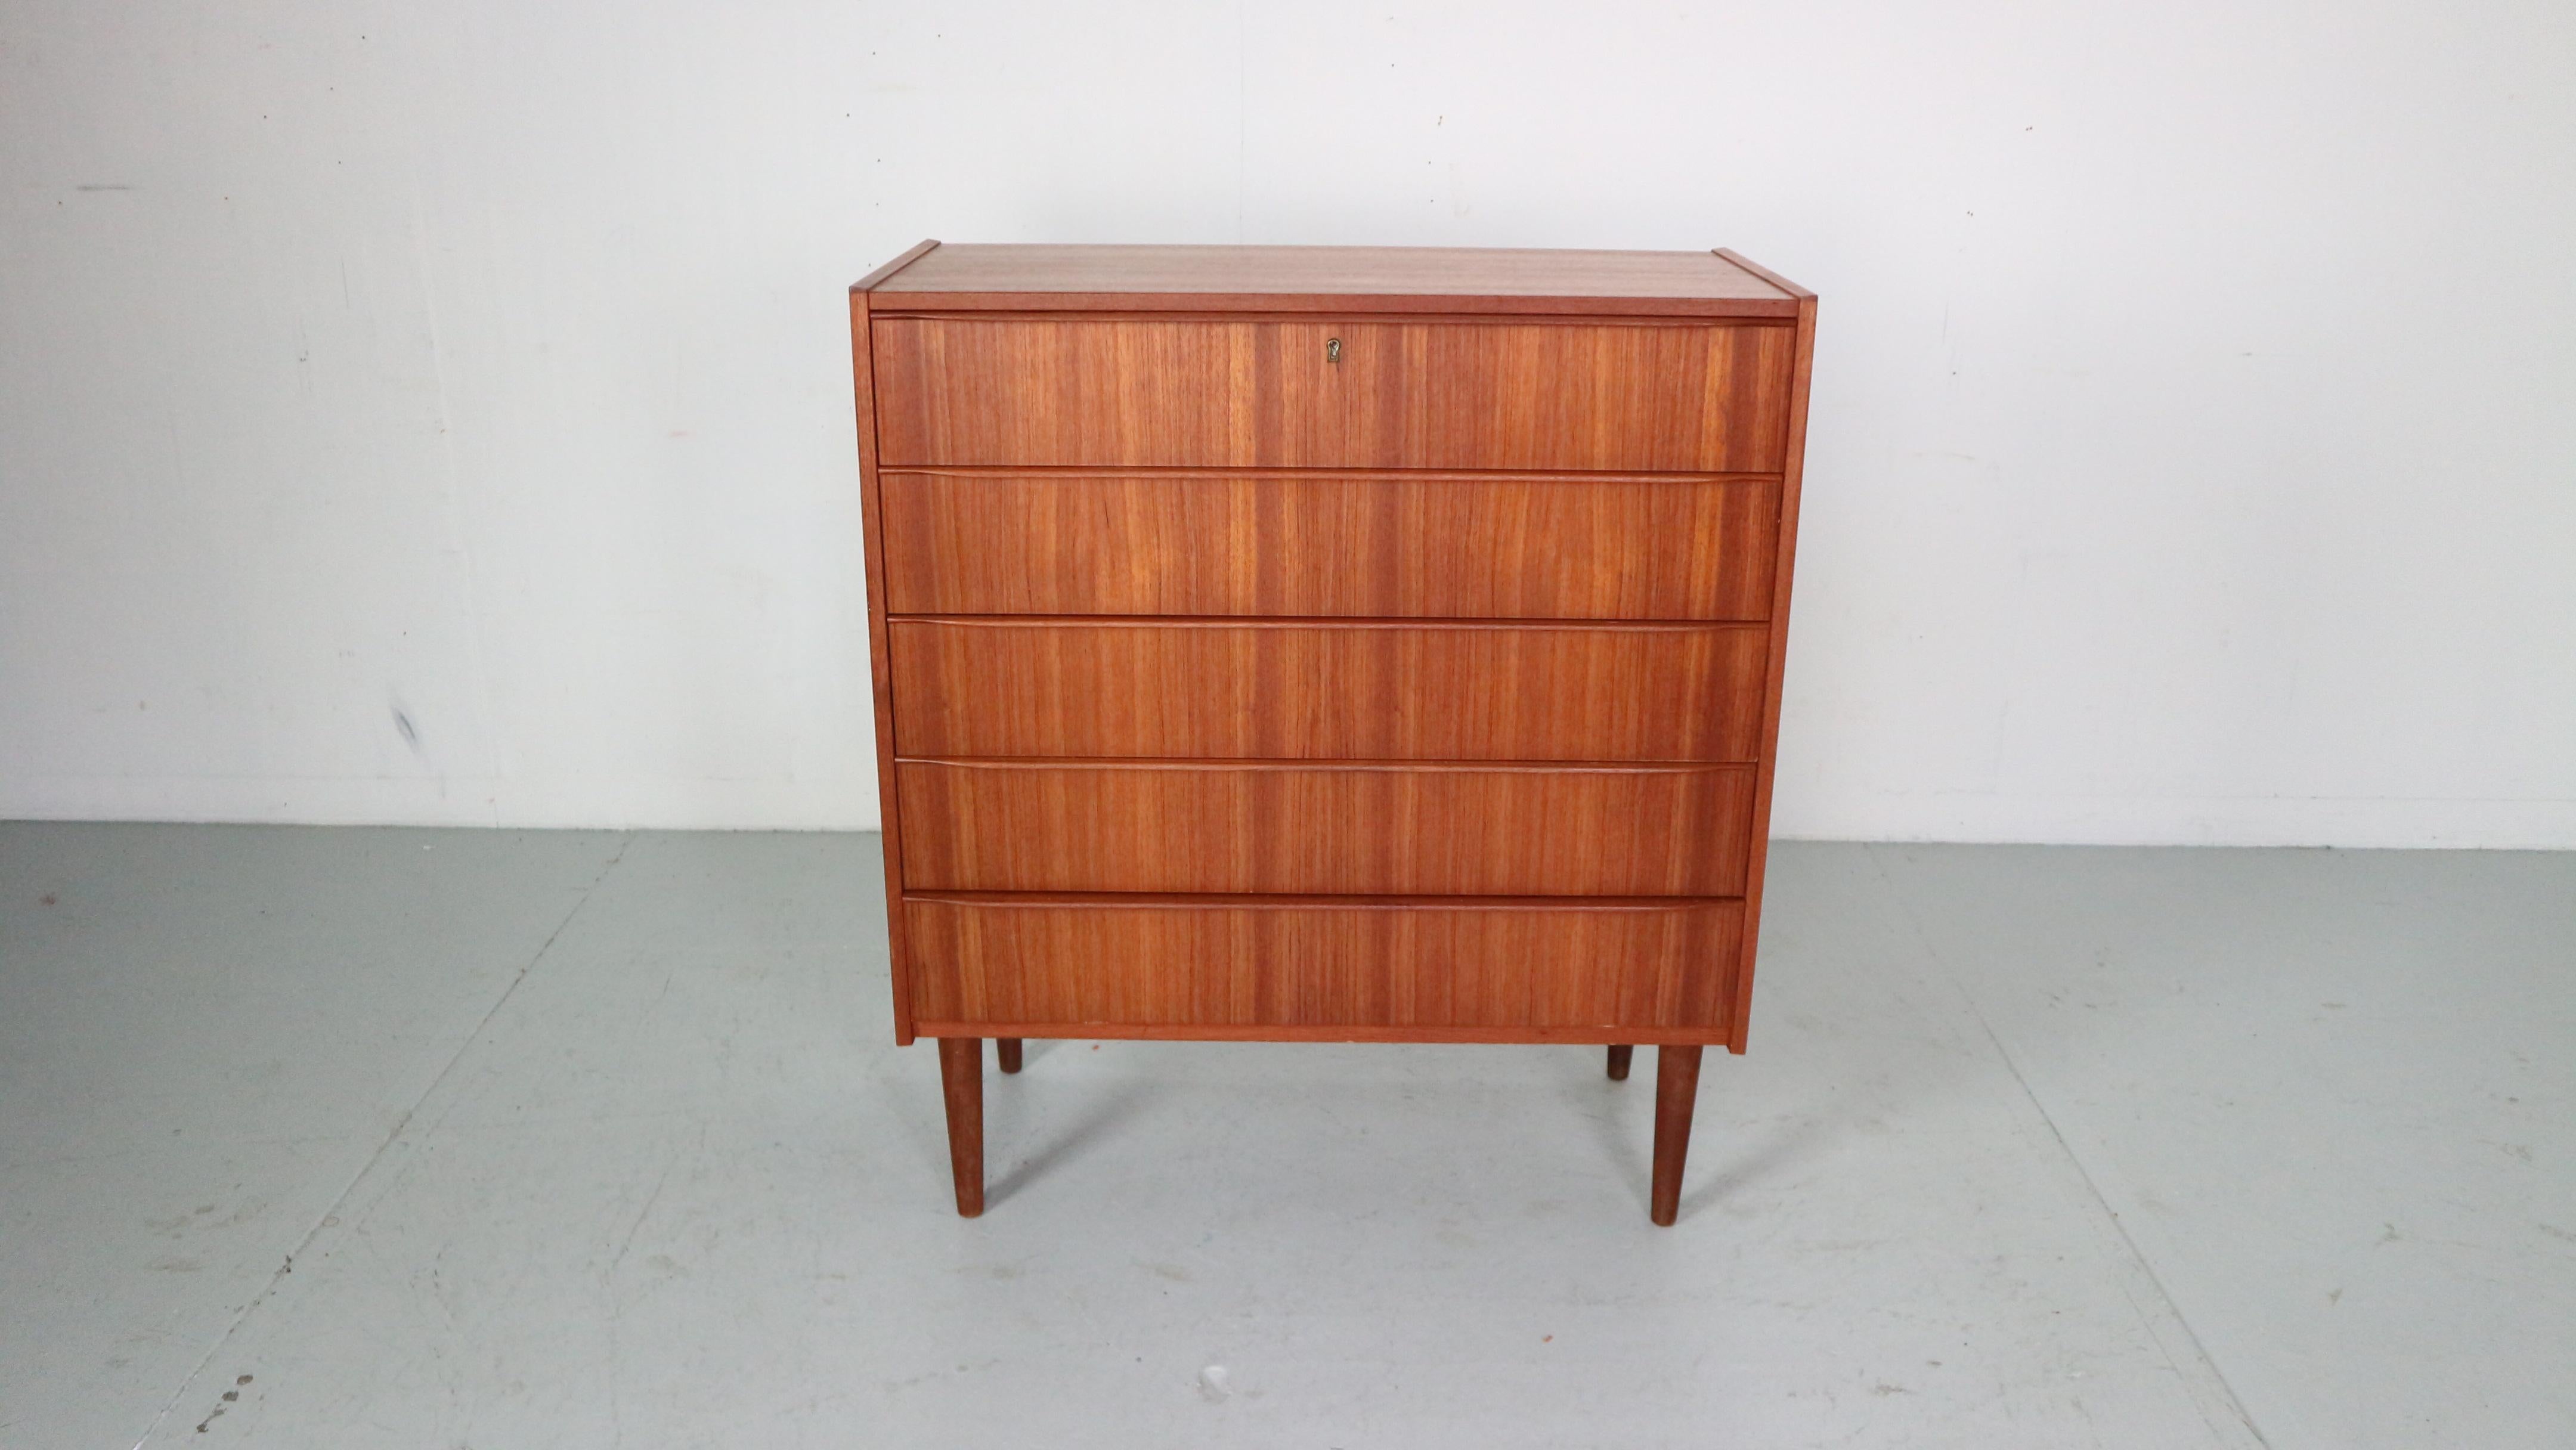 Mid- Century modern period chest of 5 drawers or tallboy cabinet made in 1960's Denmark.

Made of teak wood veneer. Elegant handles and good working drawers.
High quality Danish furniture.

The cabinet is in a good vintage condition.
It has been